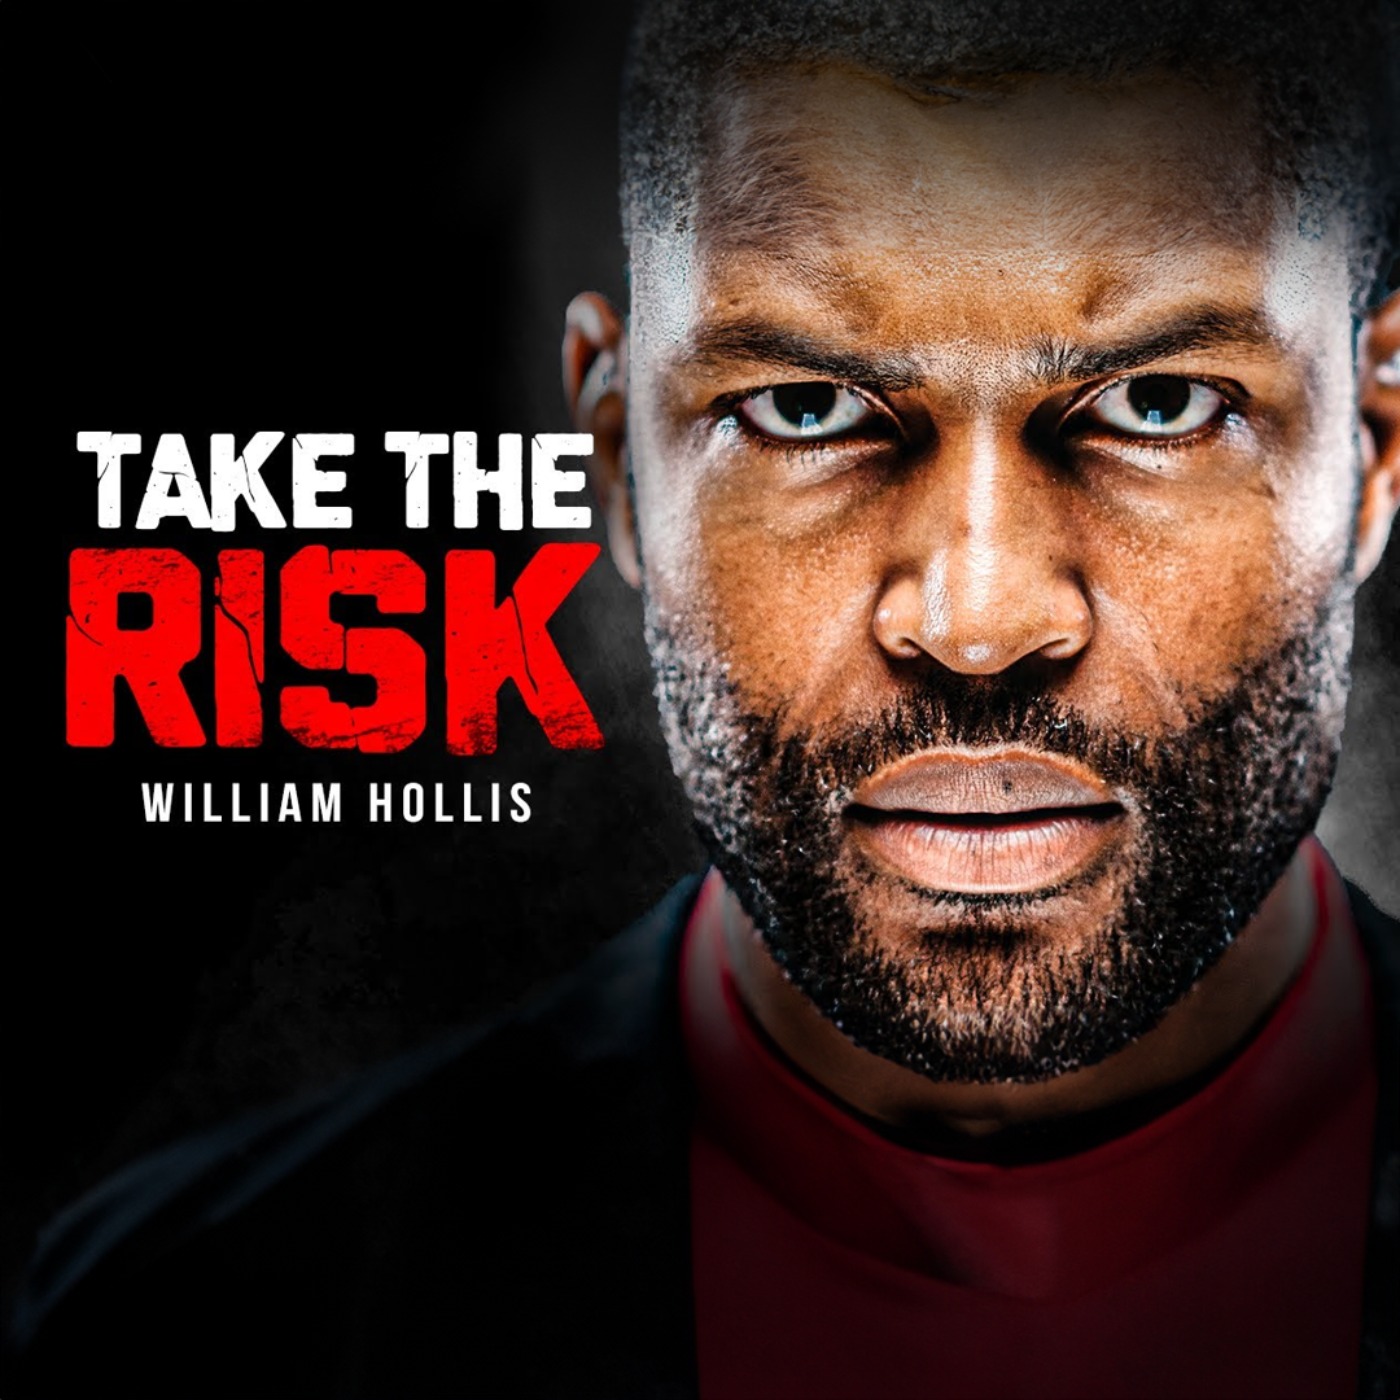 EMBRACE DISCOMFORT. TAKE THE RISK. - Powerful Motivational Speech featuring William Hollis